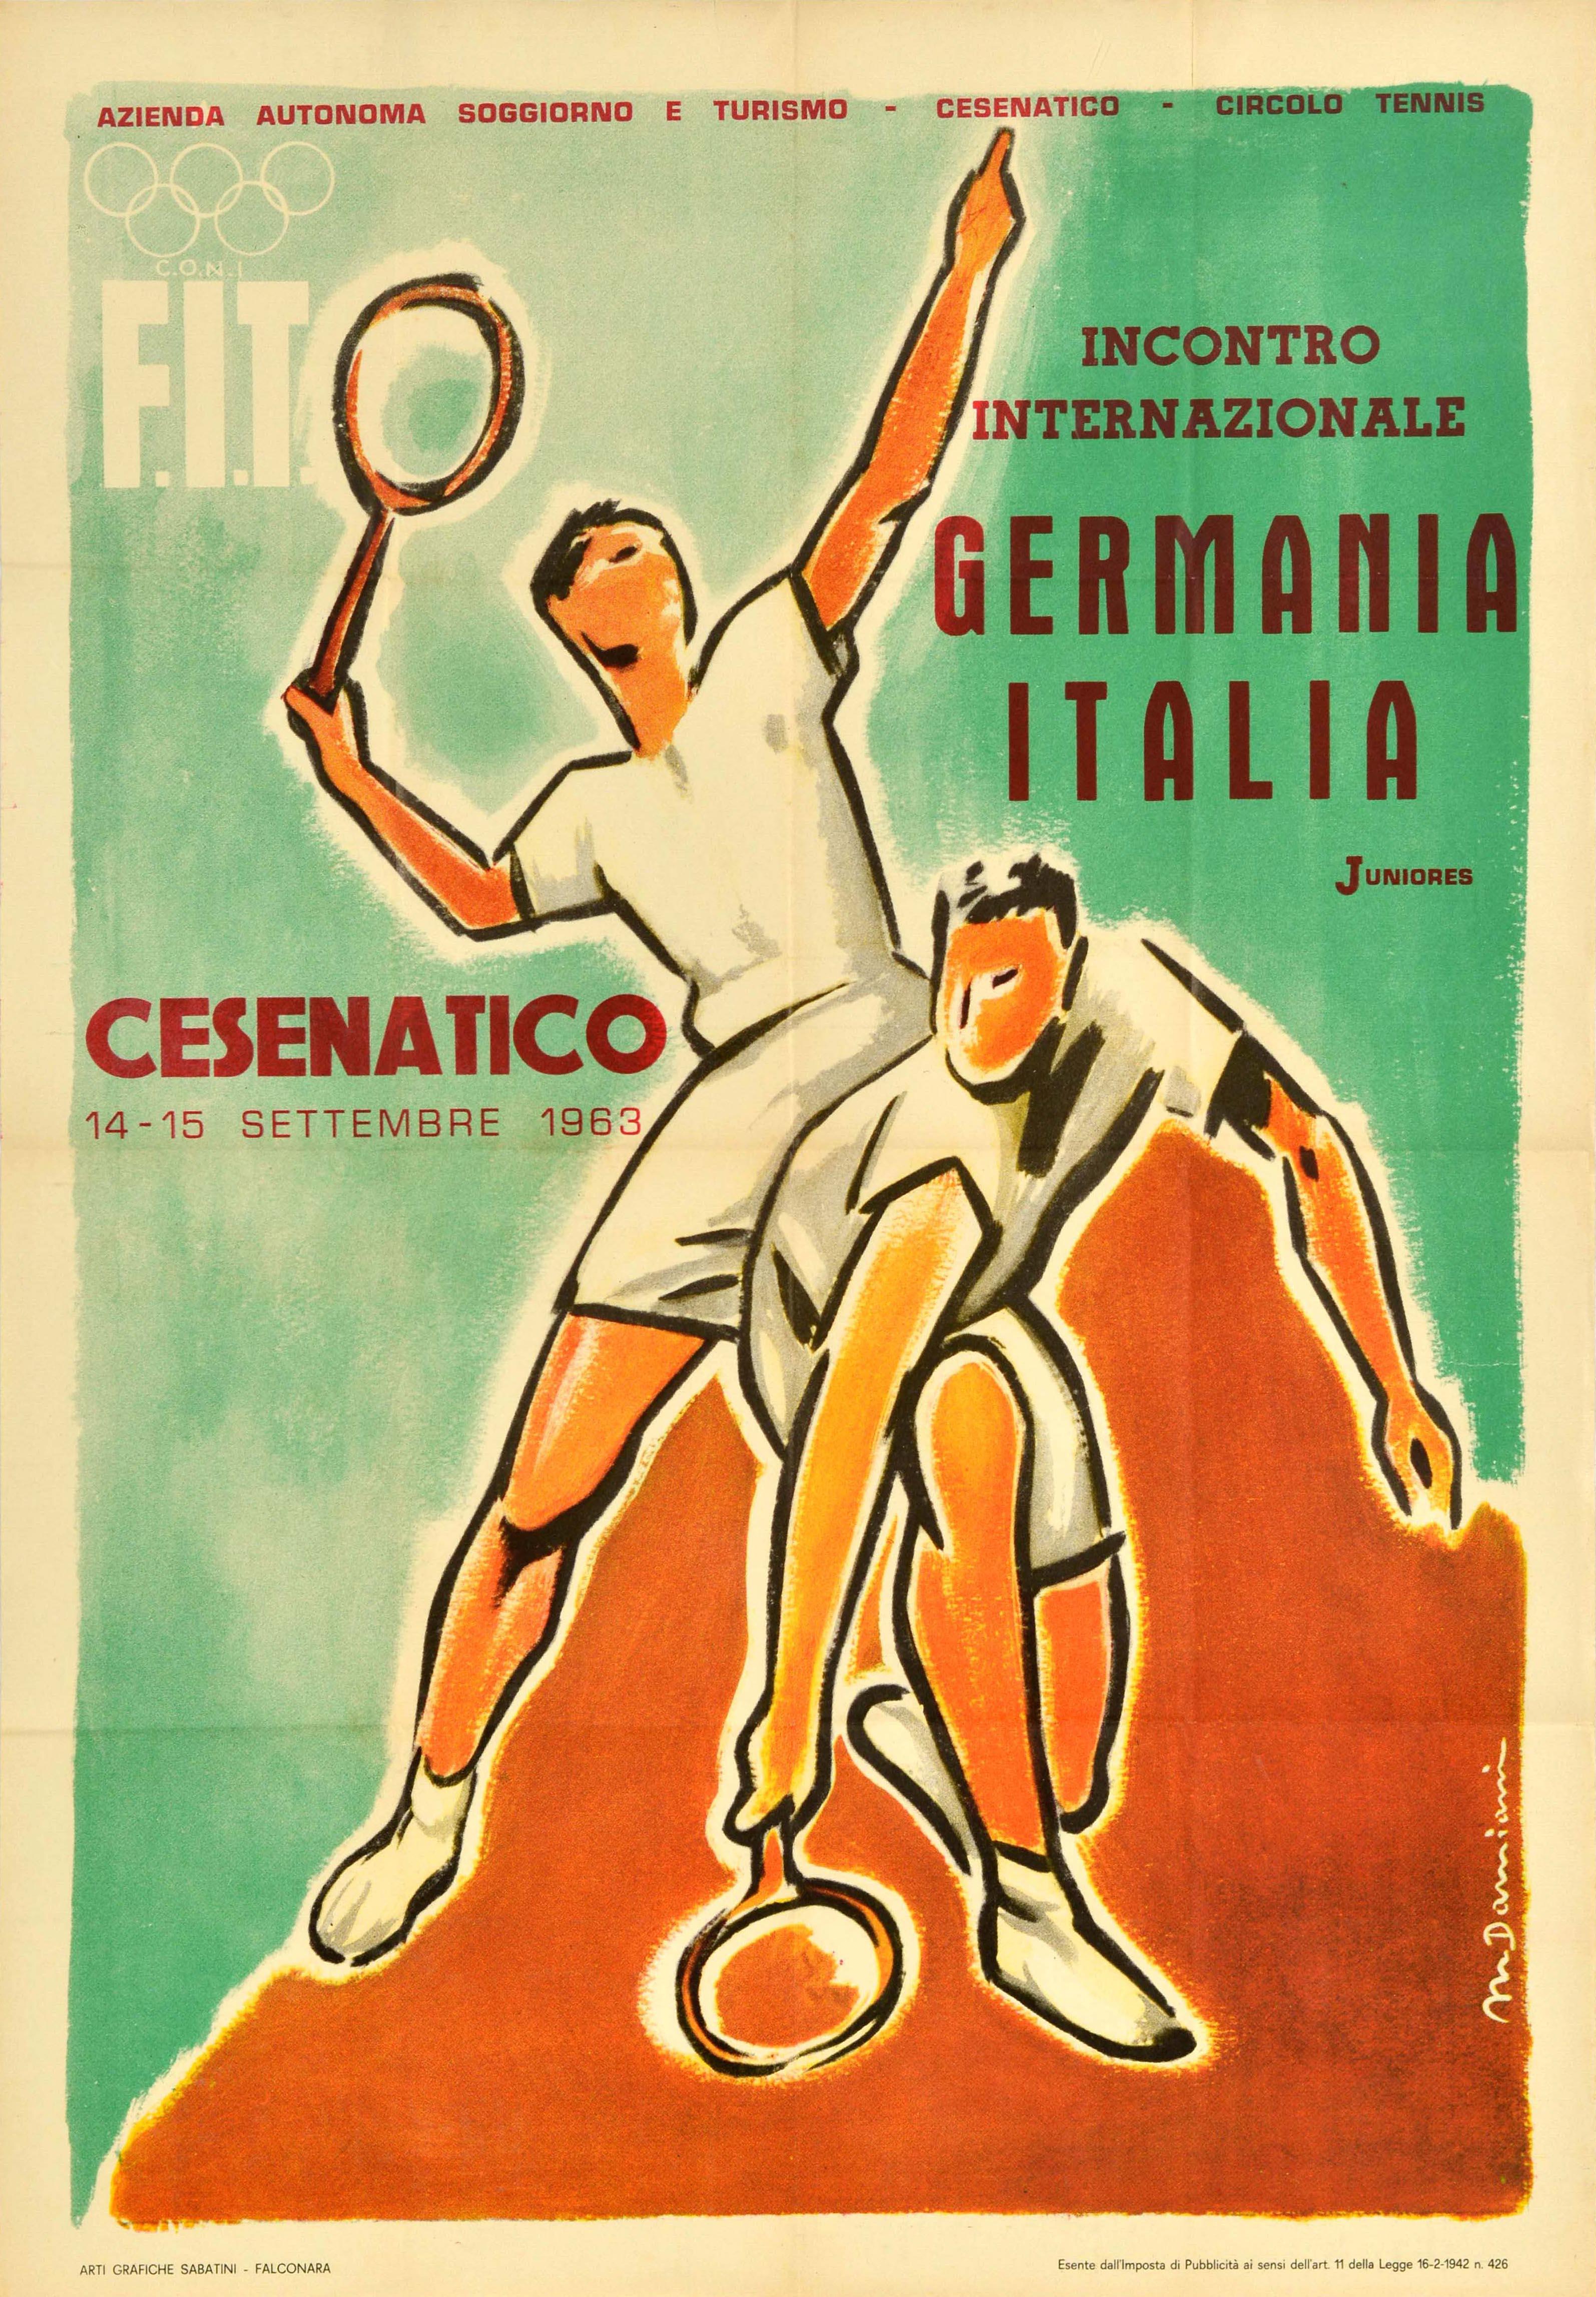 Unknown Print - Original Vintage Sport Poster Cesenatico Tennis Meeting Germany Italy Coni FIT